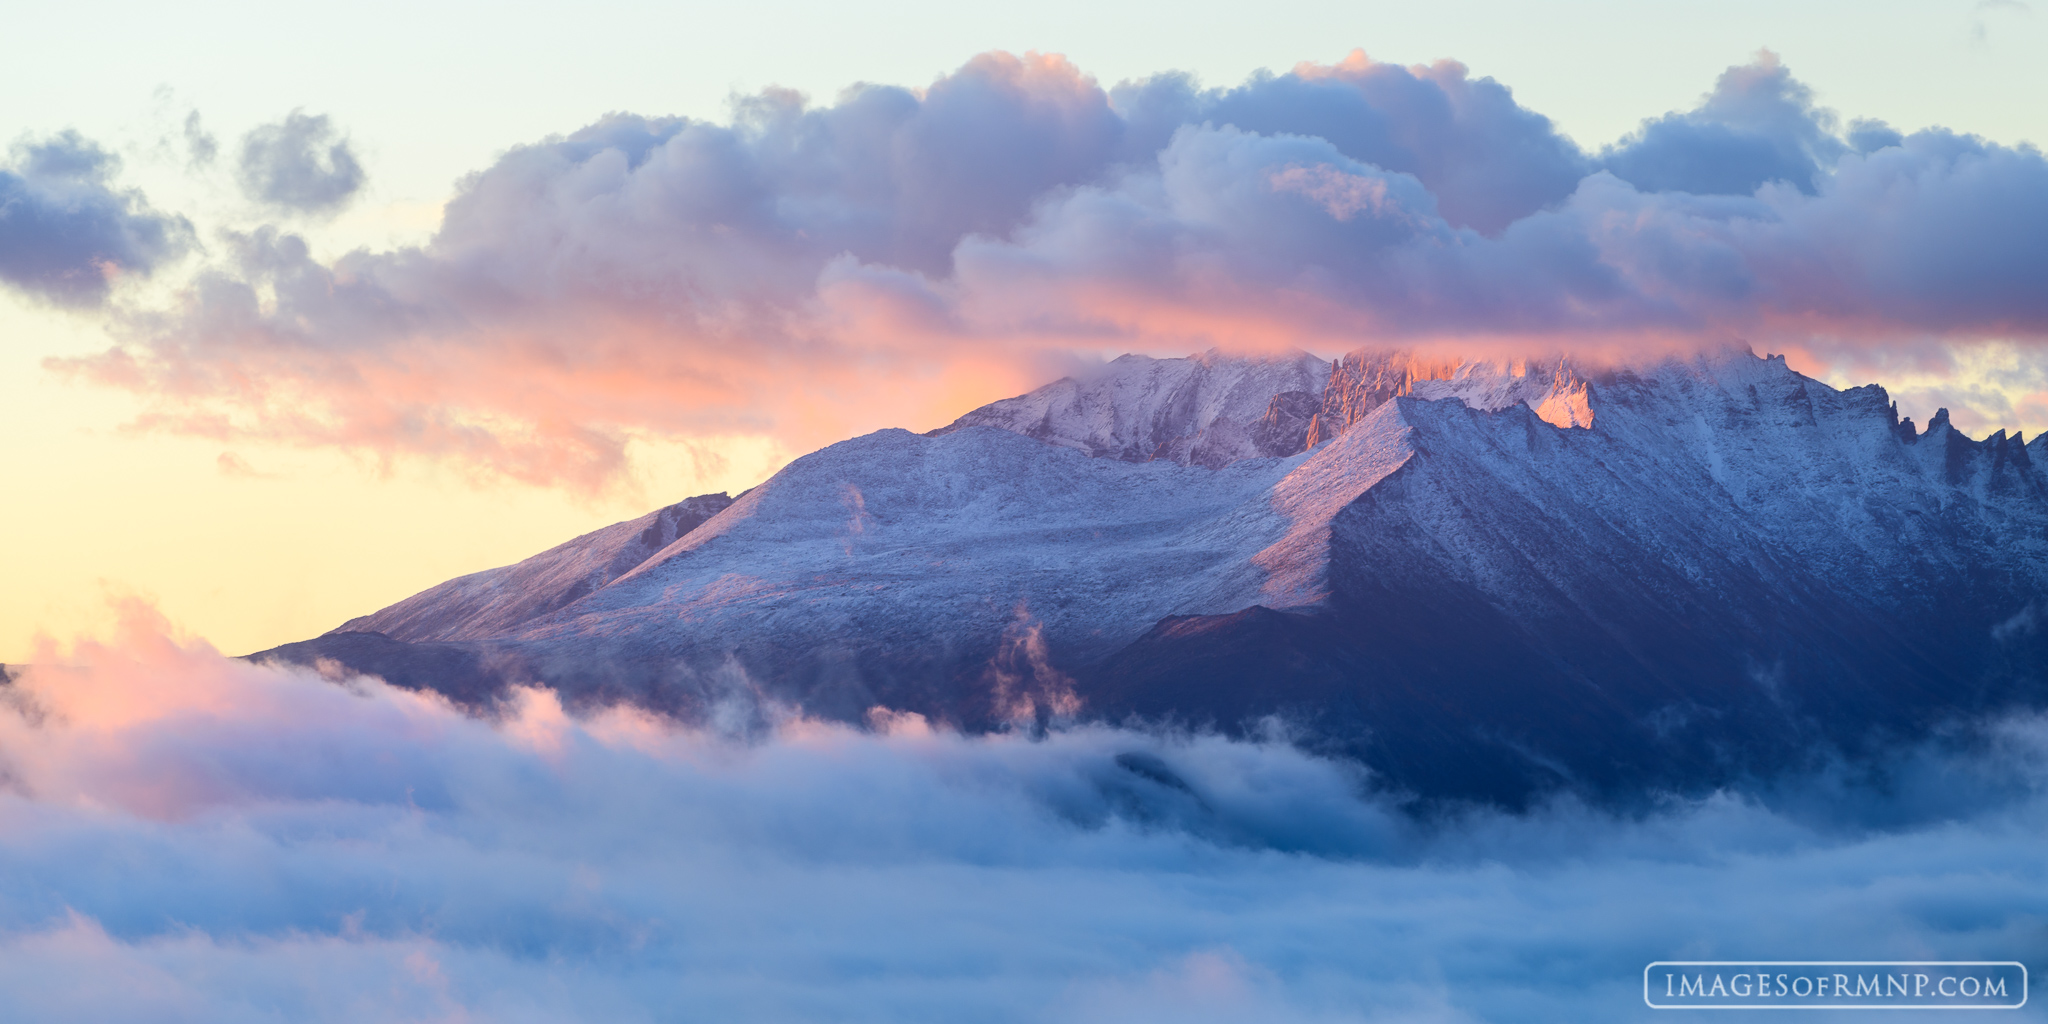 A September storm brings the first snow of the season to Longs Peak, this dramatic and mysterious mountain that dominates the...